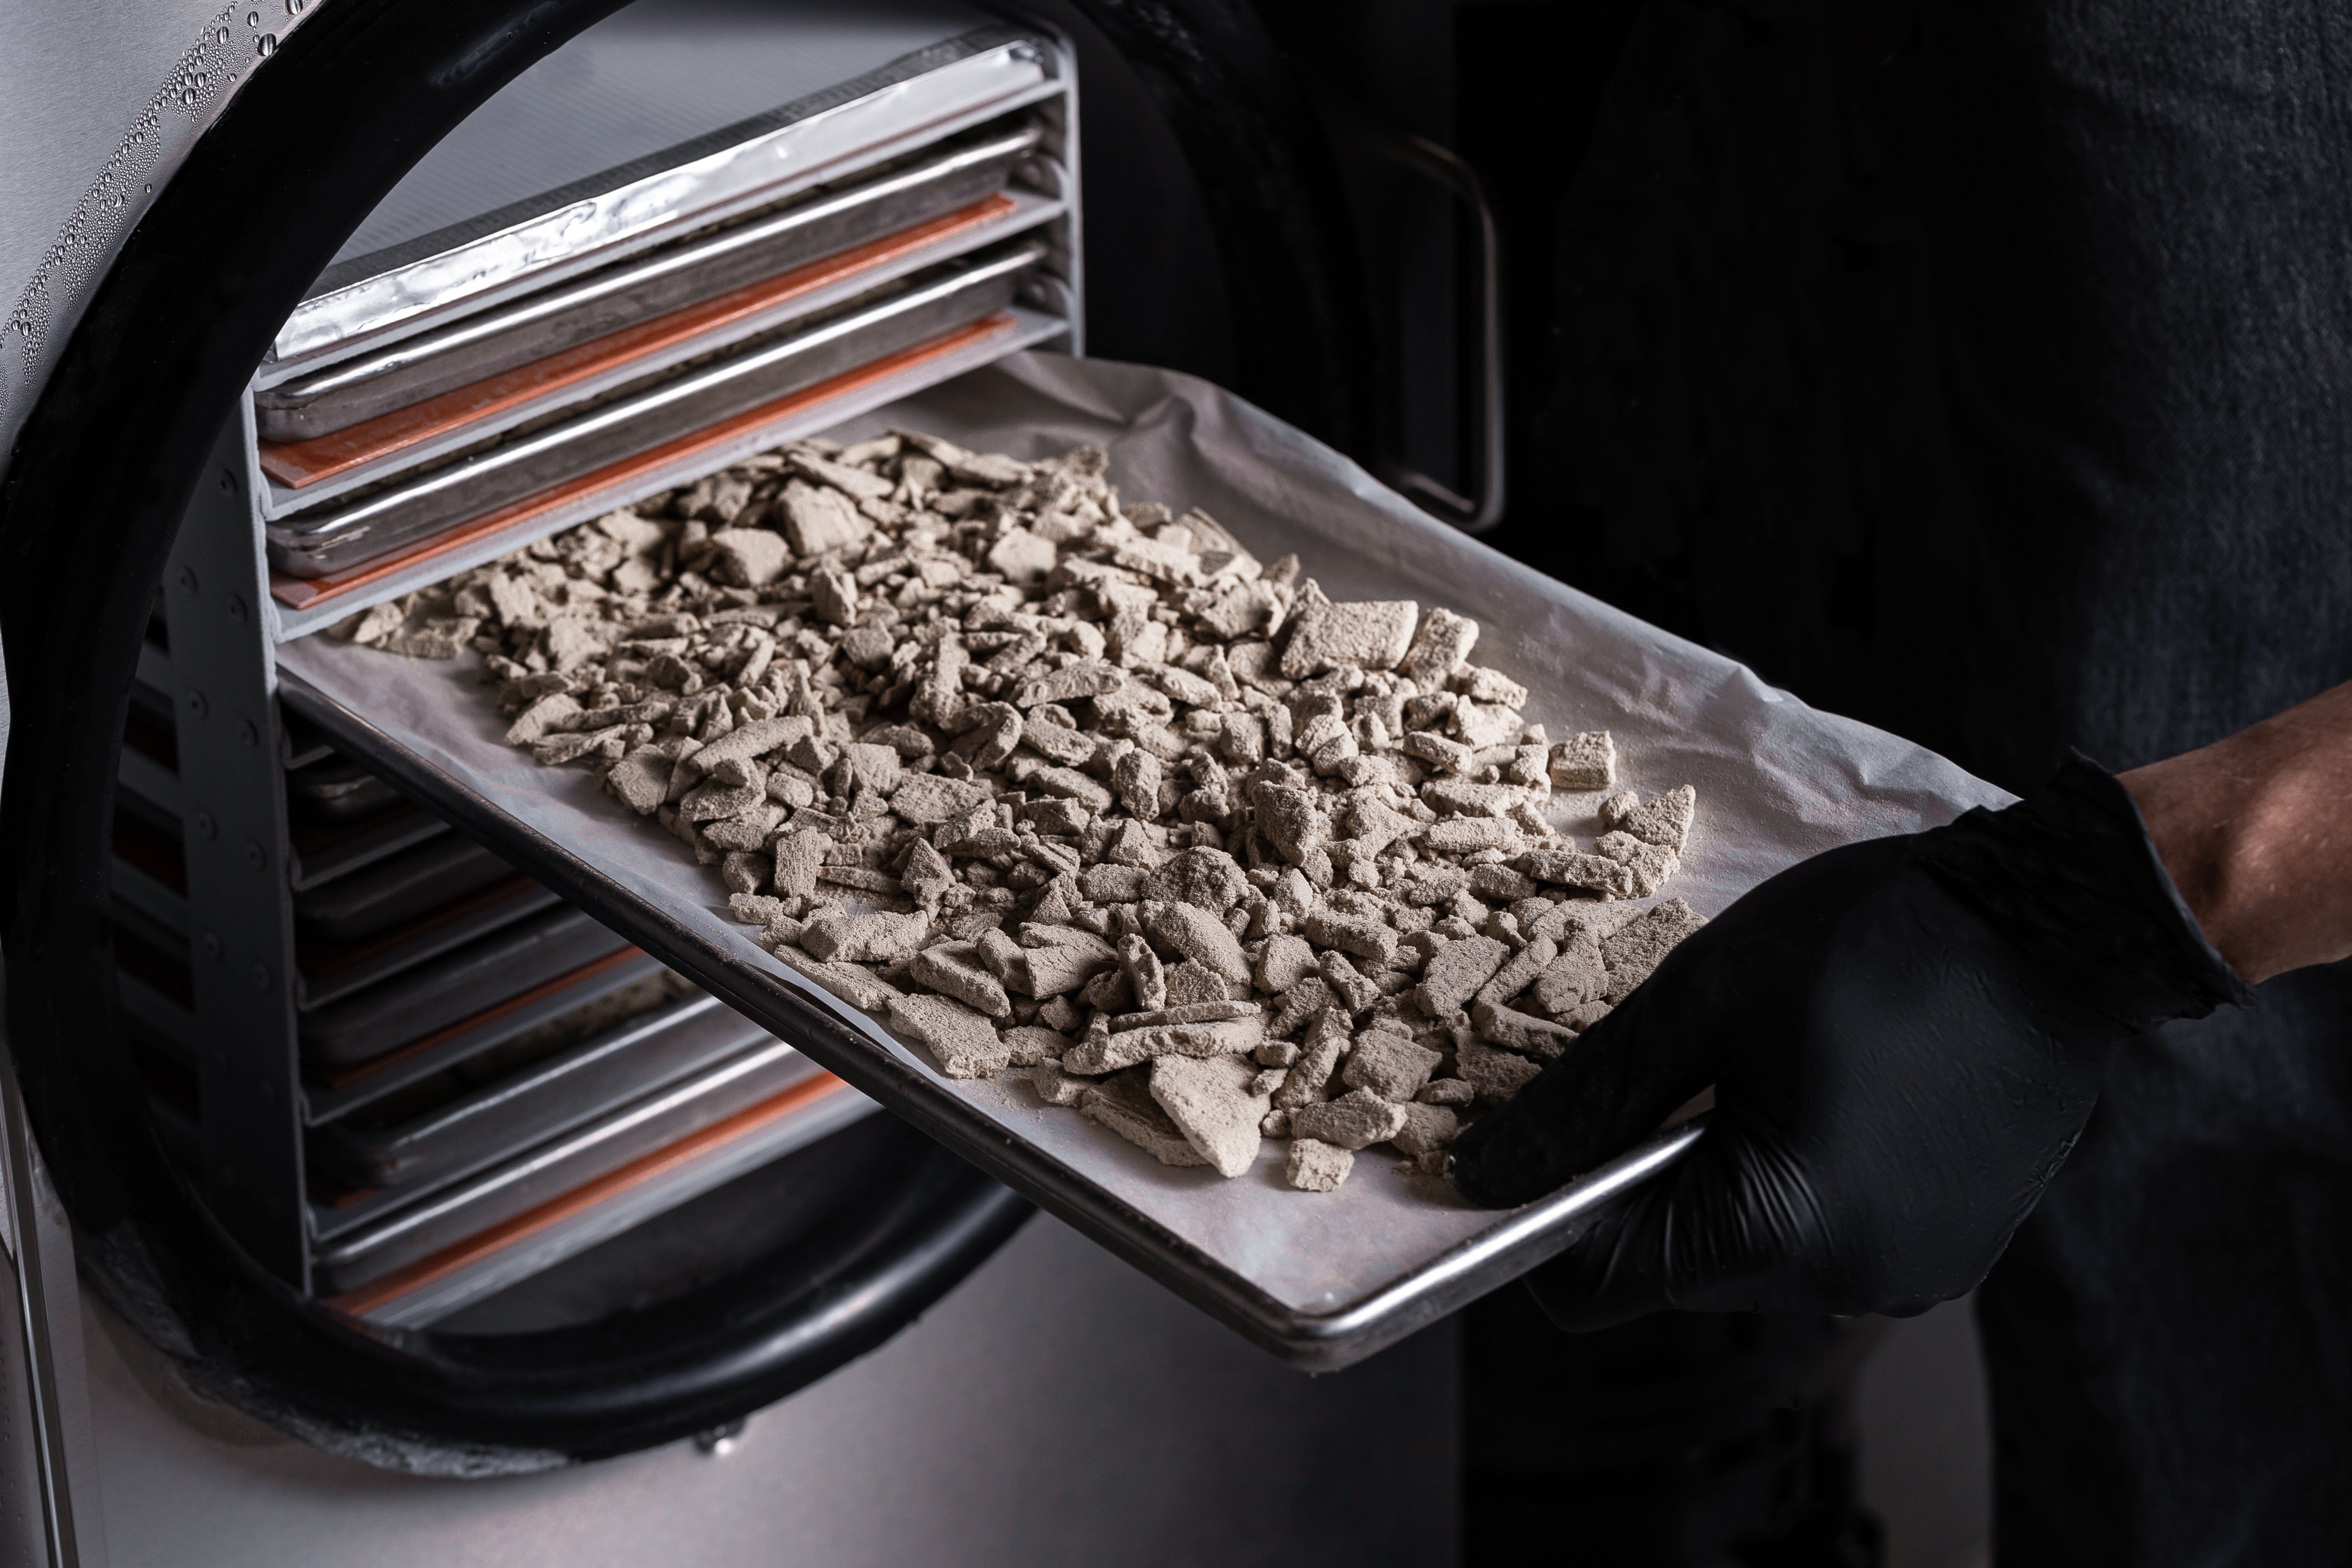 A metal tray filled with freeze-dried live rosin hash is removed from an oven.